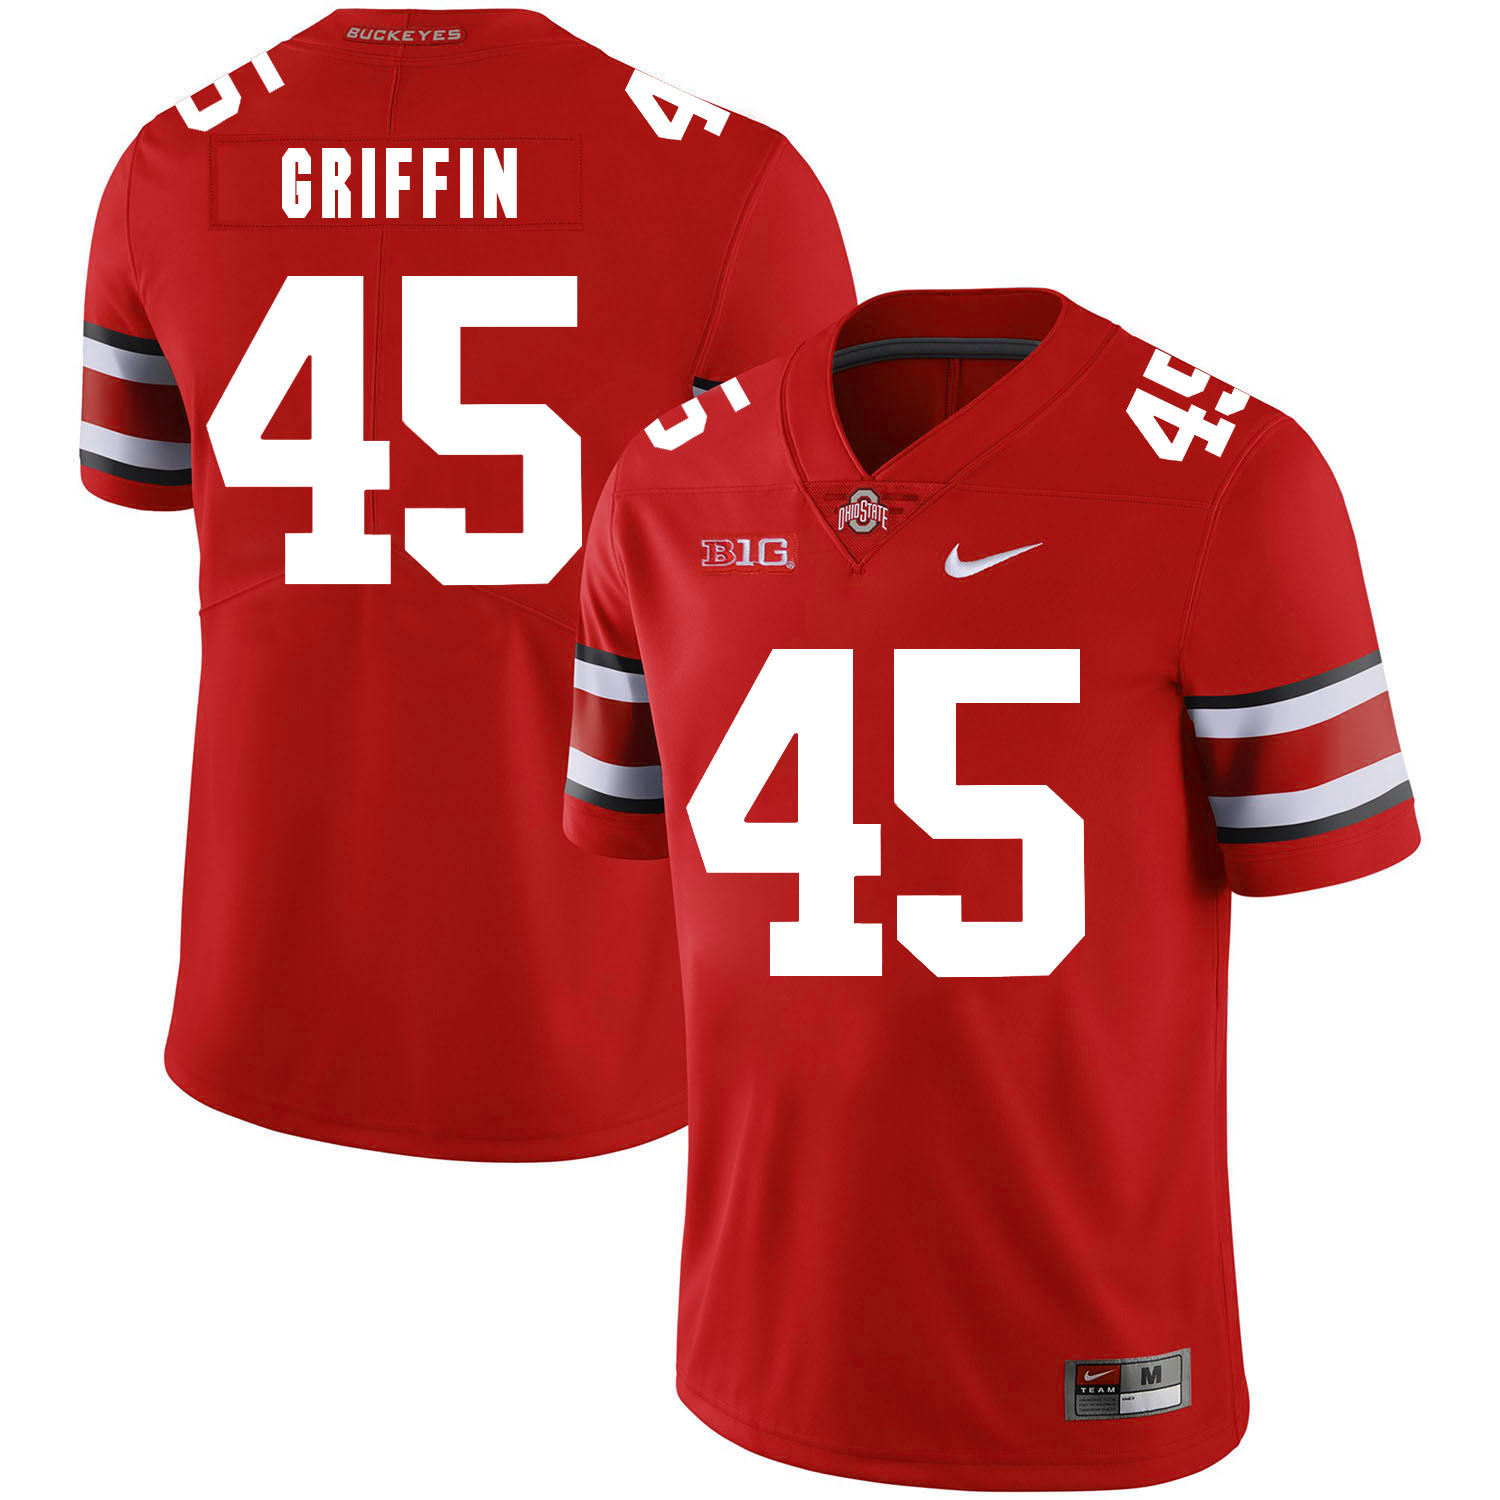 Ohio State Buckeyes 45 Archie Griffin Red Nike College Football Jersey